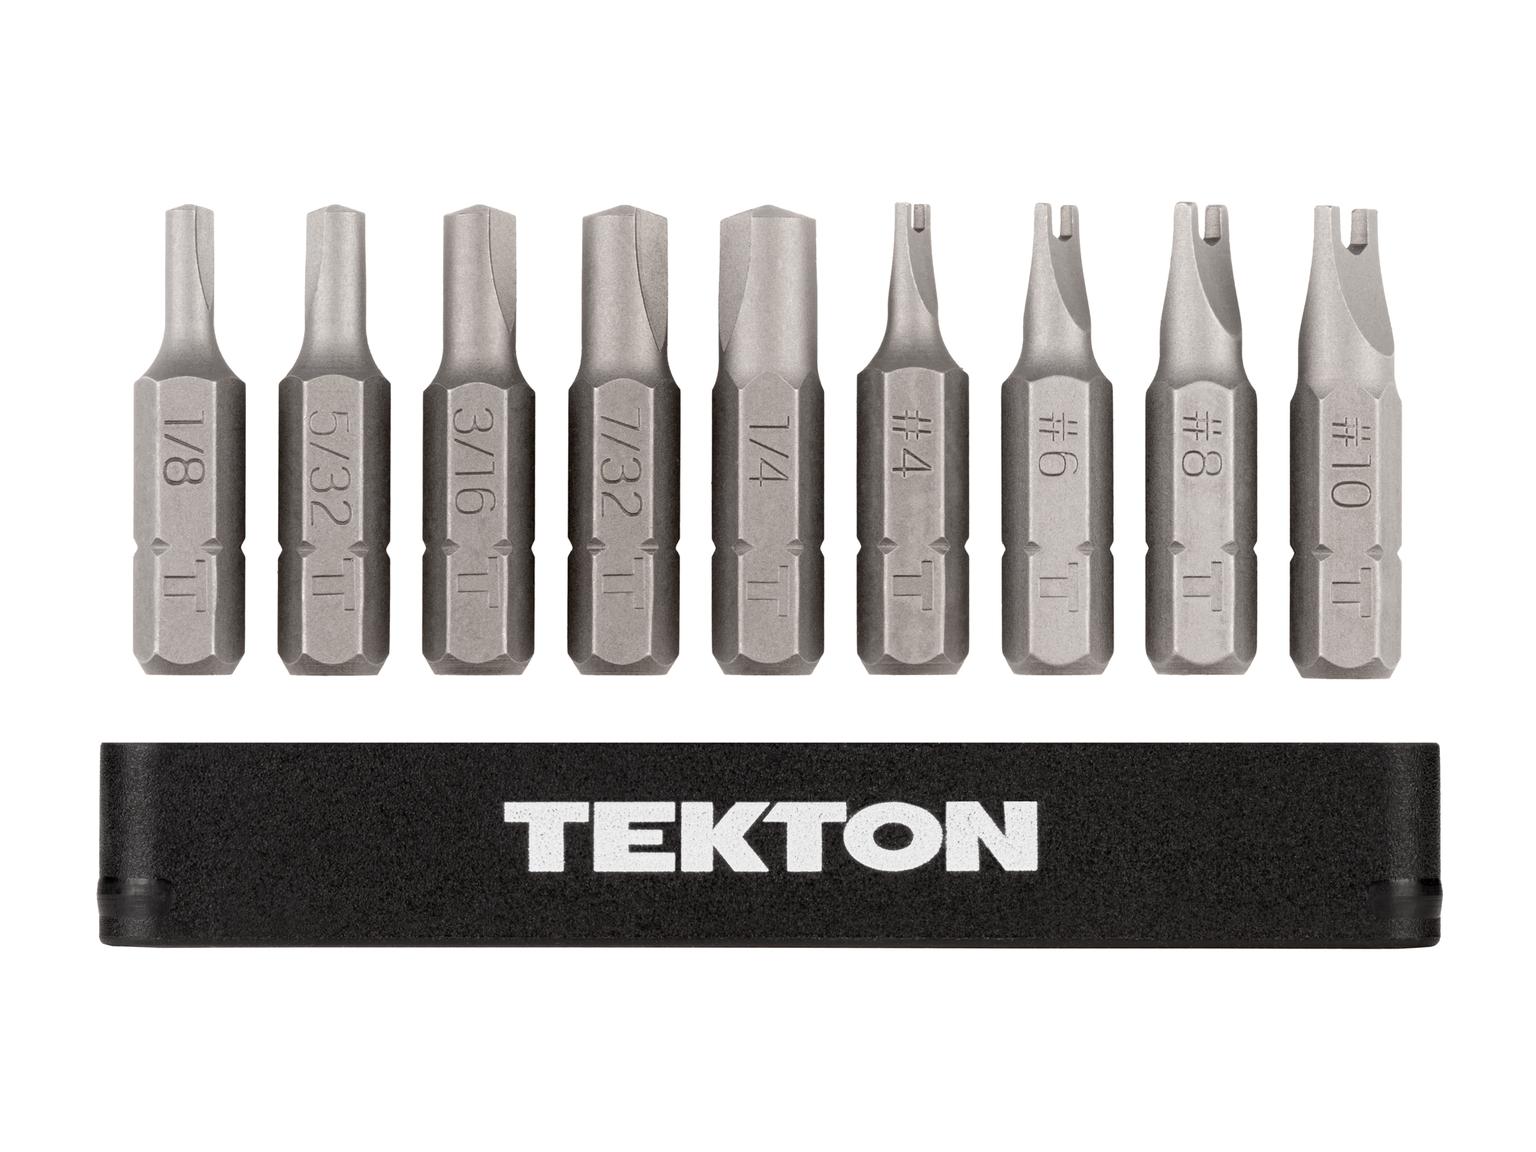 TEKTON DZZ93002-T 1/4 Inch Clutch and Spanner Security Bit Set with Rail, 9-Piece (1/8-1/4 in., #4-#10)